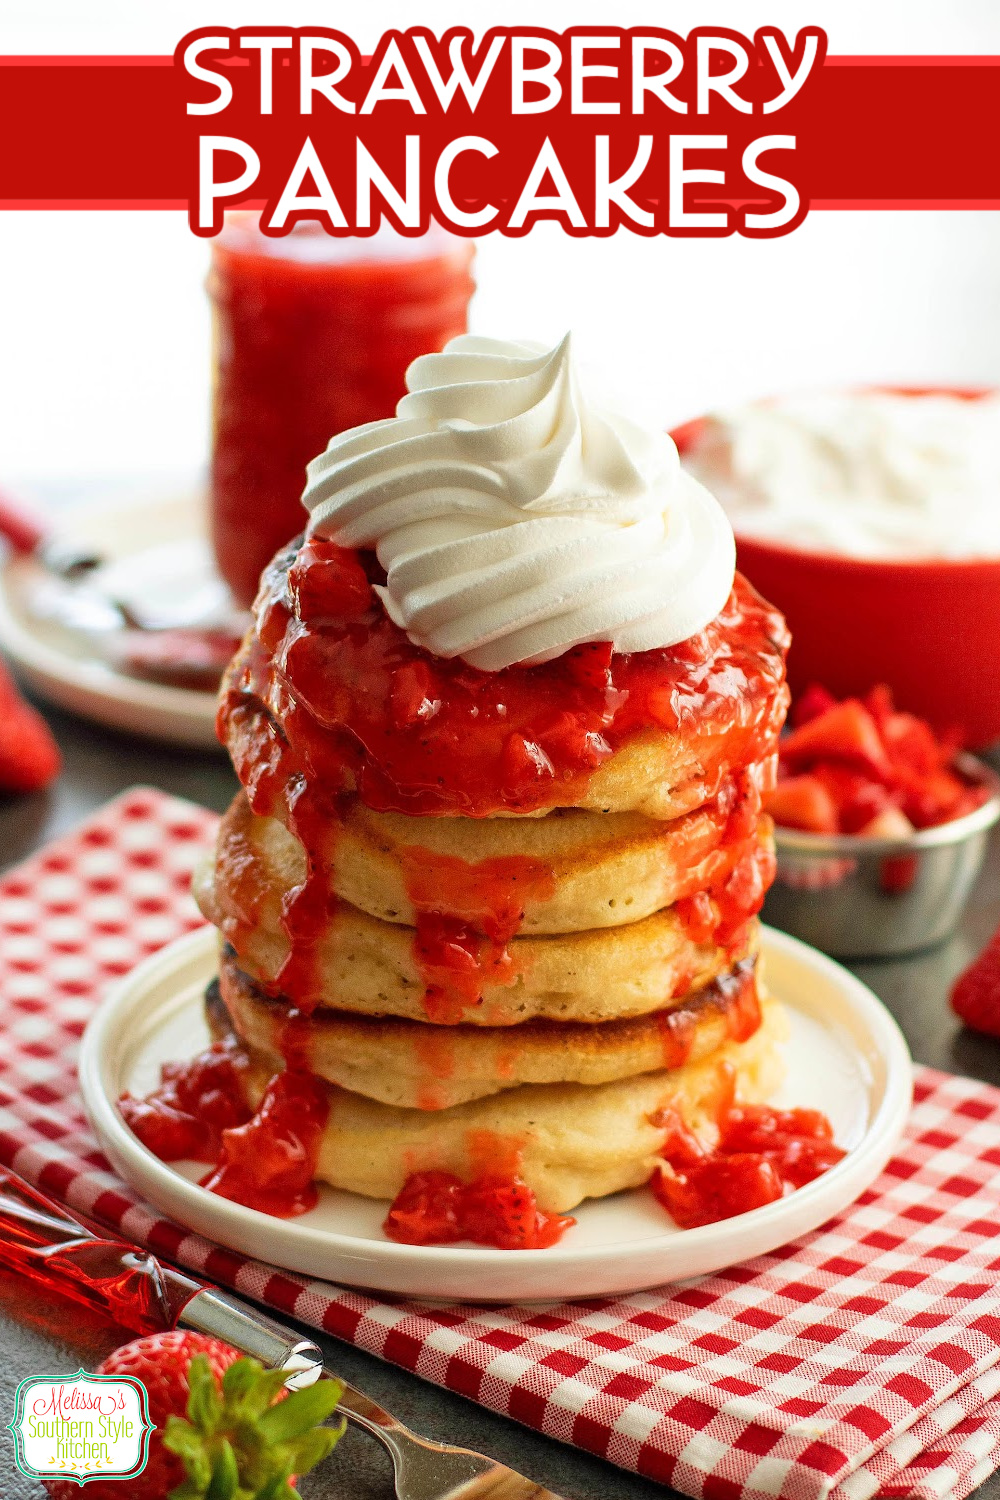 These fluffy Strawberry Pancakes are filled with fresh strawberries and topped with homemade strawberry sauce and a dollop of whipped cream. #strawberrypancakes #buttermilkpancakes #pancakerecipes #strawberries #stgraberrydesserts #brunchrecipes #strawberryshortcake